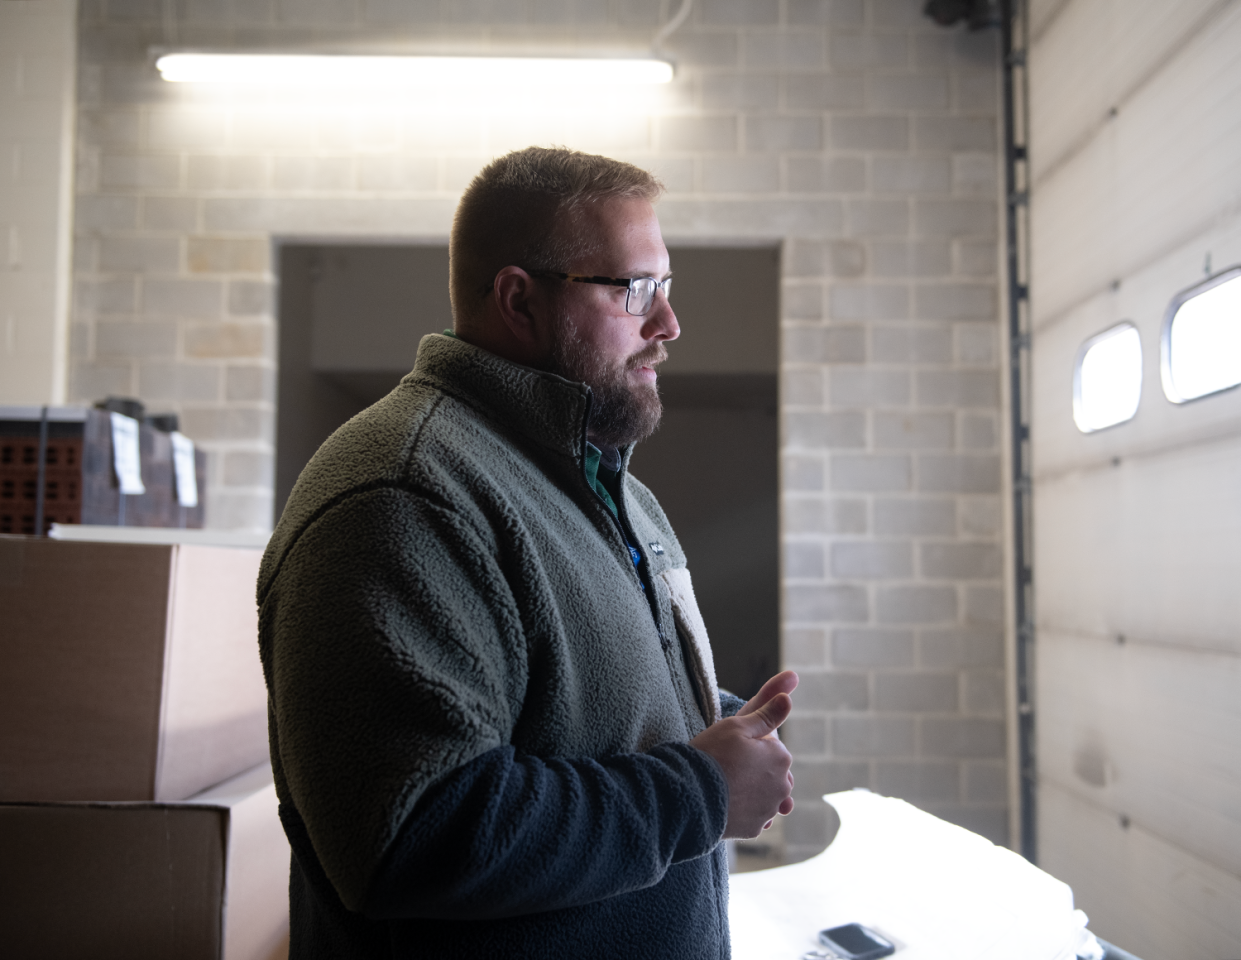 Portage County Emergency Management Director Ryan Shackleford stands between two large climate-controlled storage rooms in the agency's storage facility.